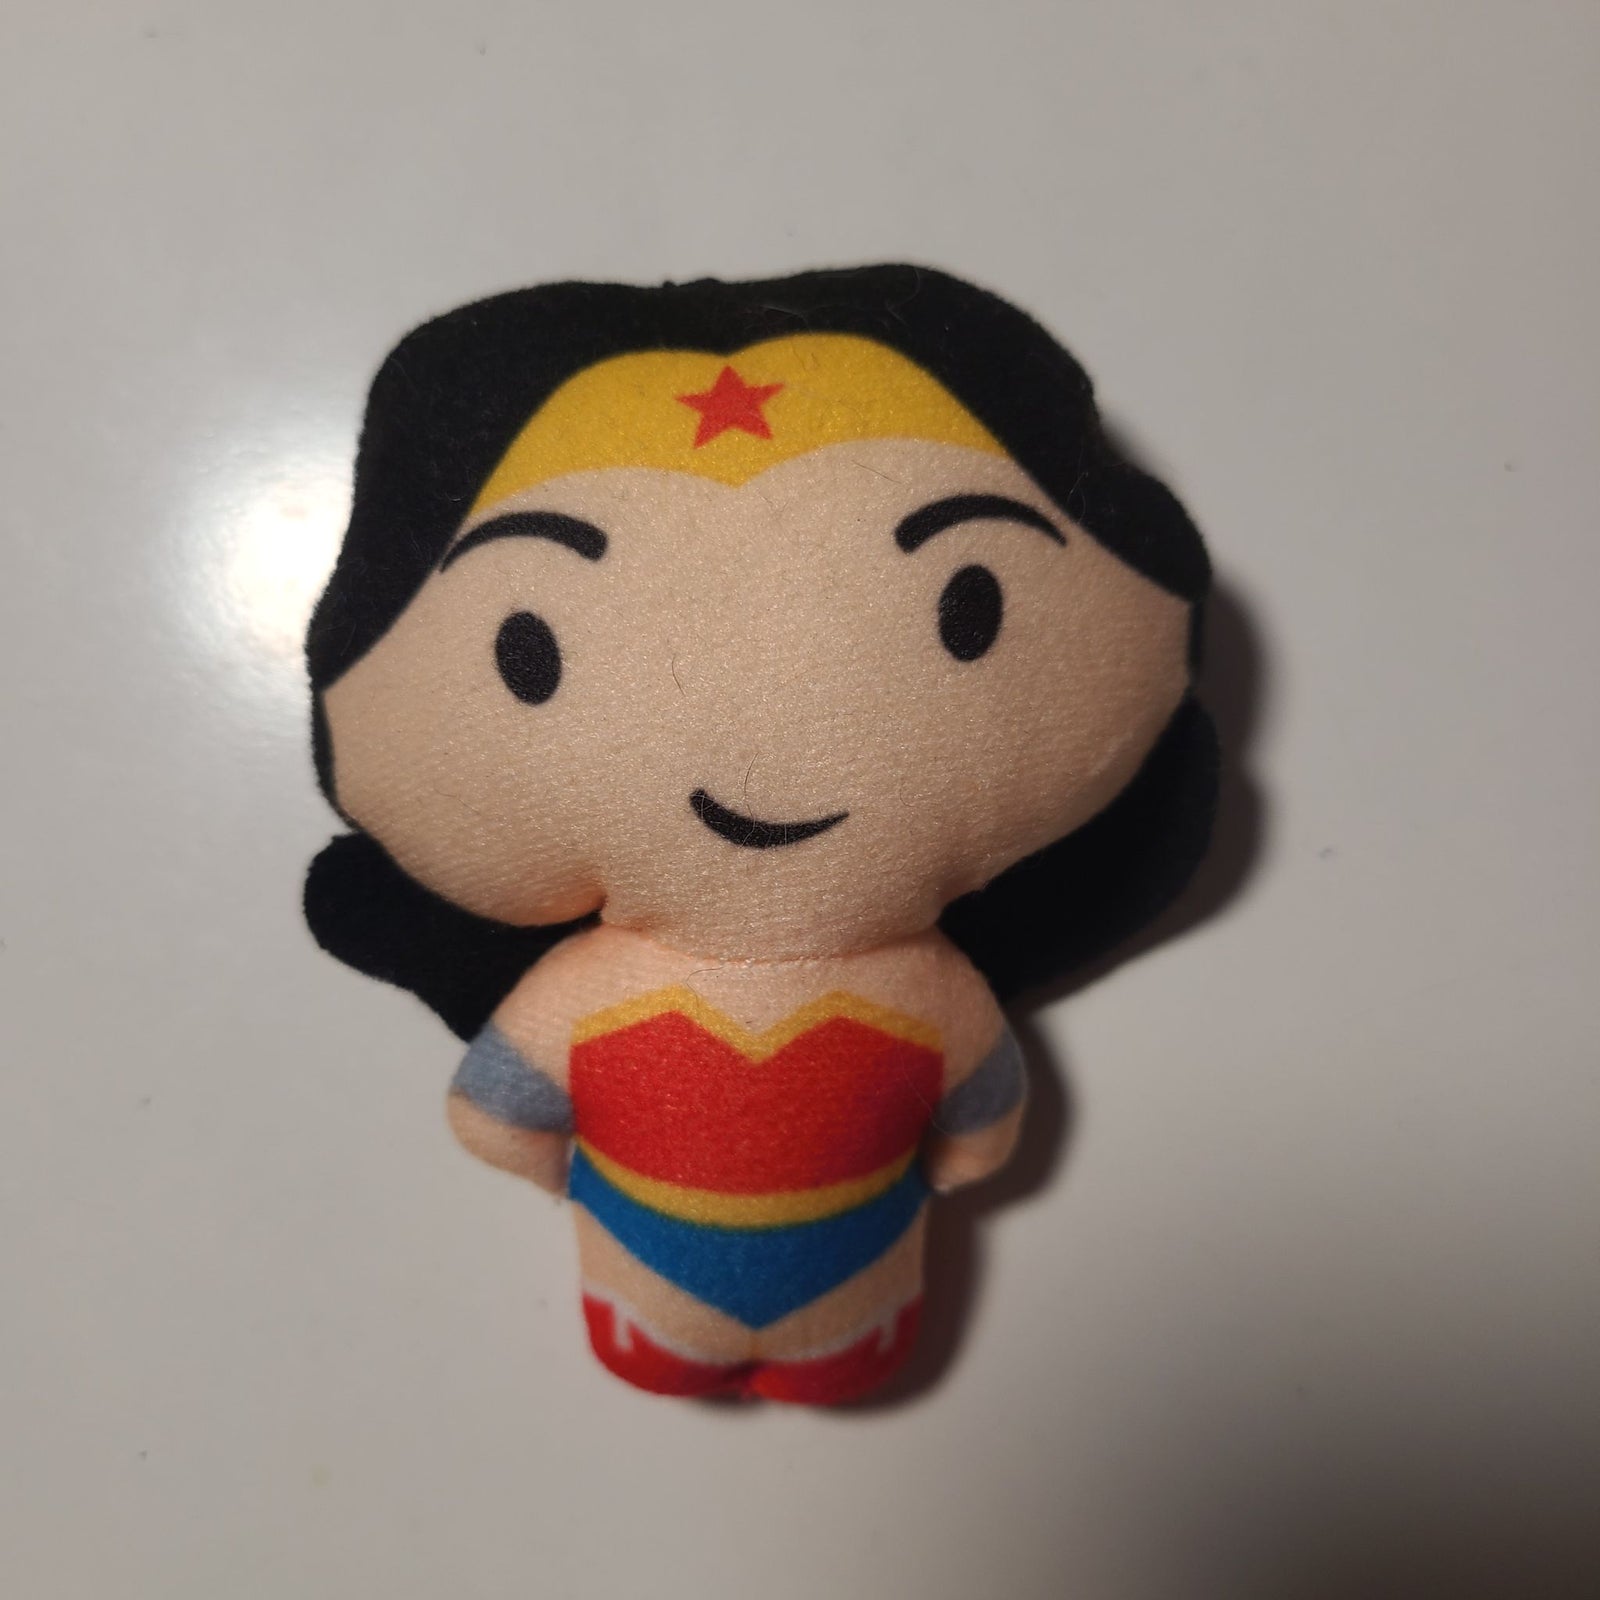 Wonder Woman  - Justice League DC Super Heroes by McDonalds Happy Meal Toys 2021 - 1